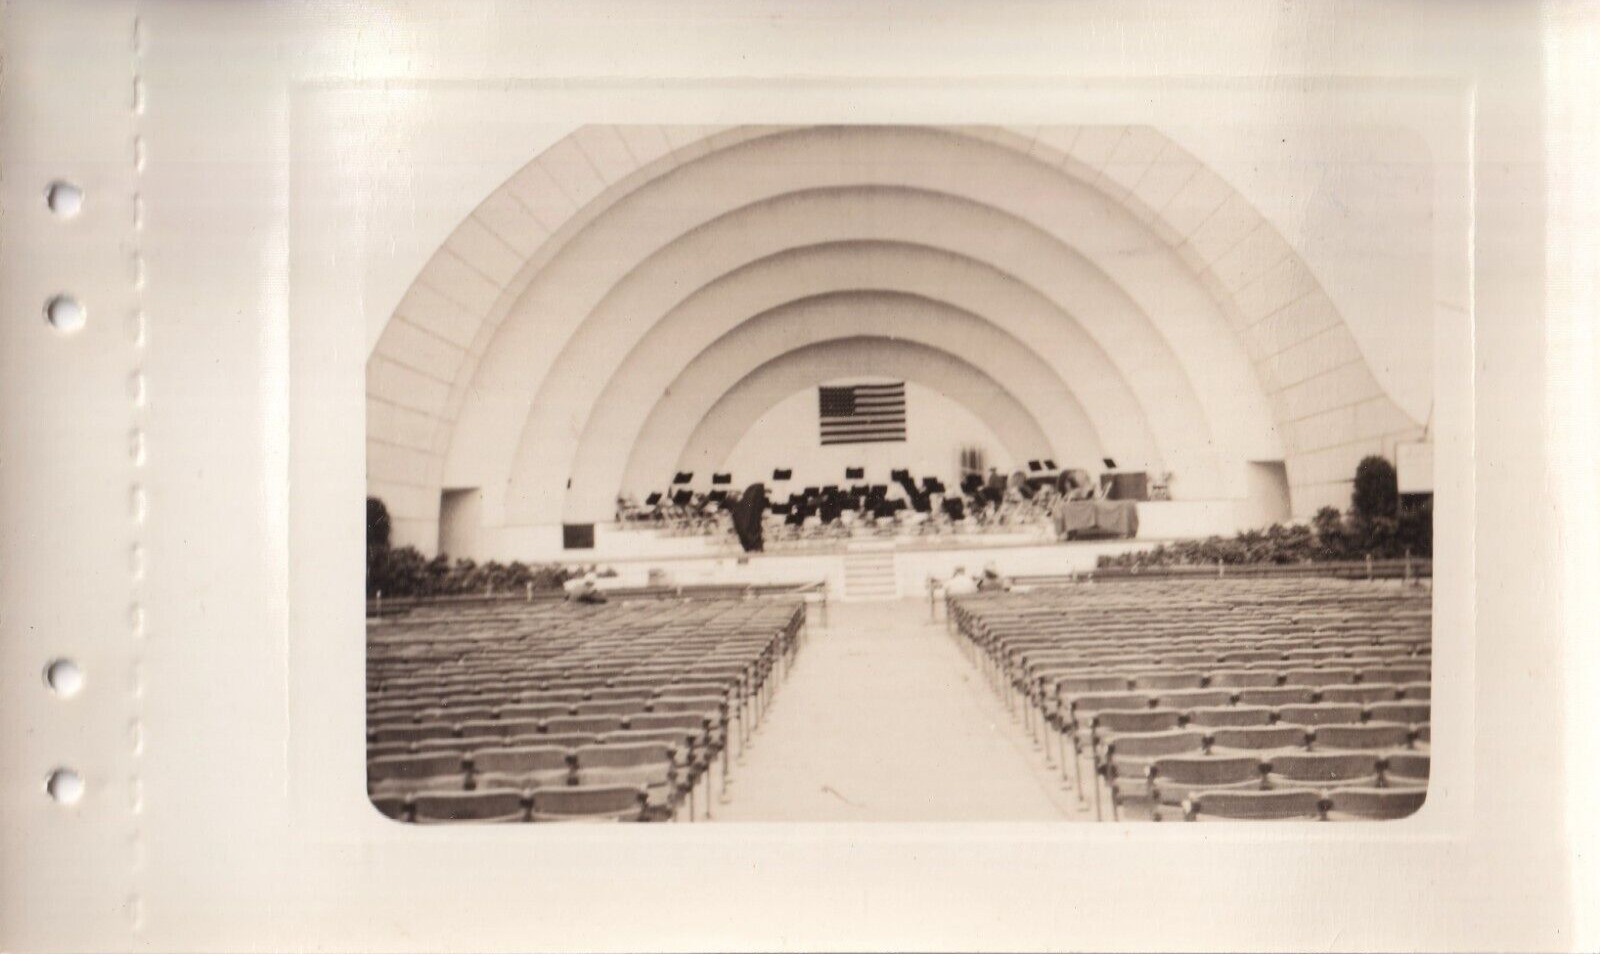 Vintage Found B&W Photograph Grant Park Band Stand Chicago, Illinois 1941